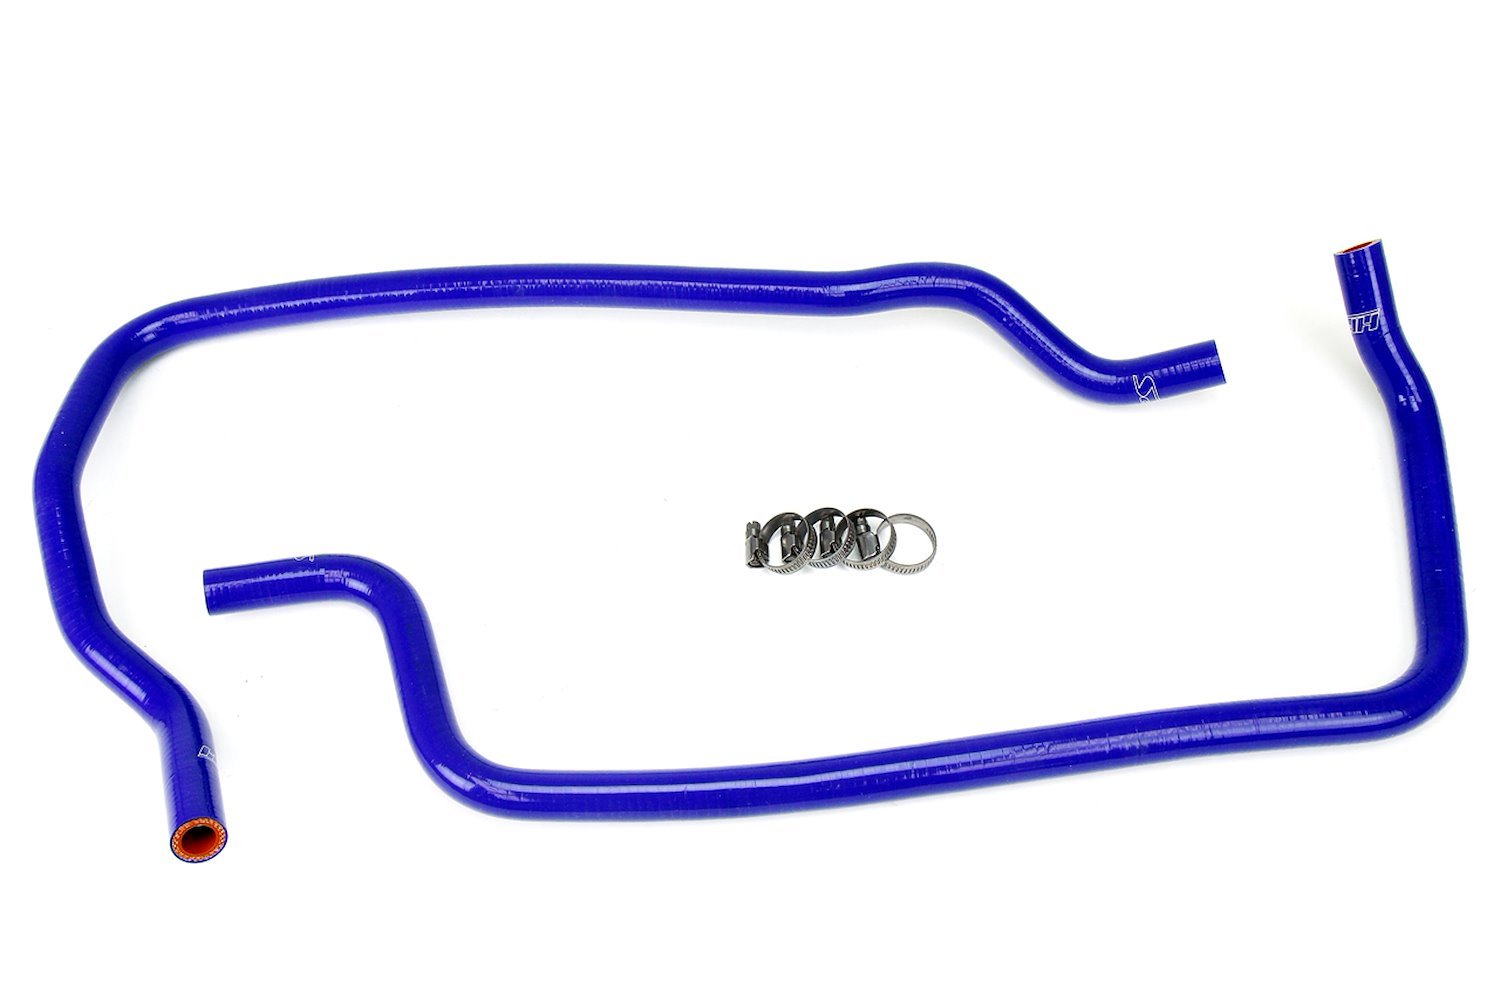 57-1449H-BLUE Heater Hose Kit, High-Temp 3-Ply Reinforced Silicone, Replace OEM Rubber Heater Coolant Hoses